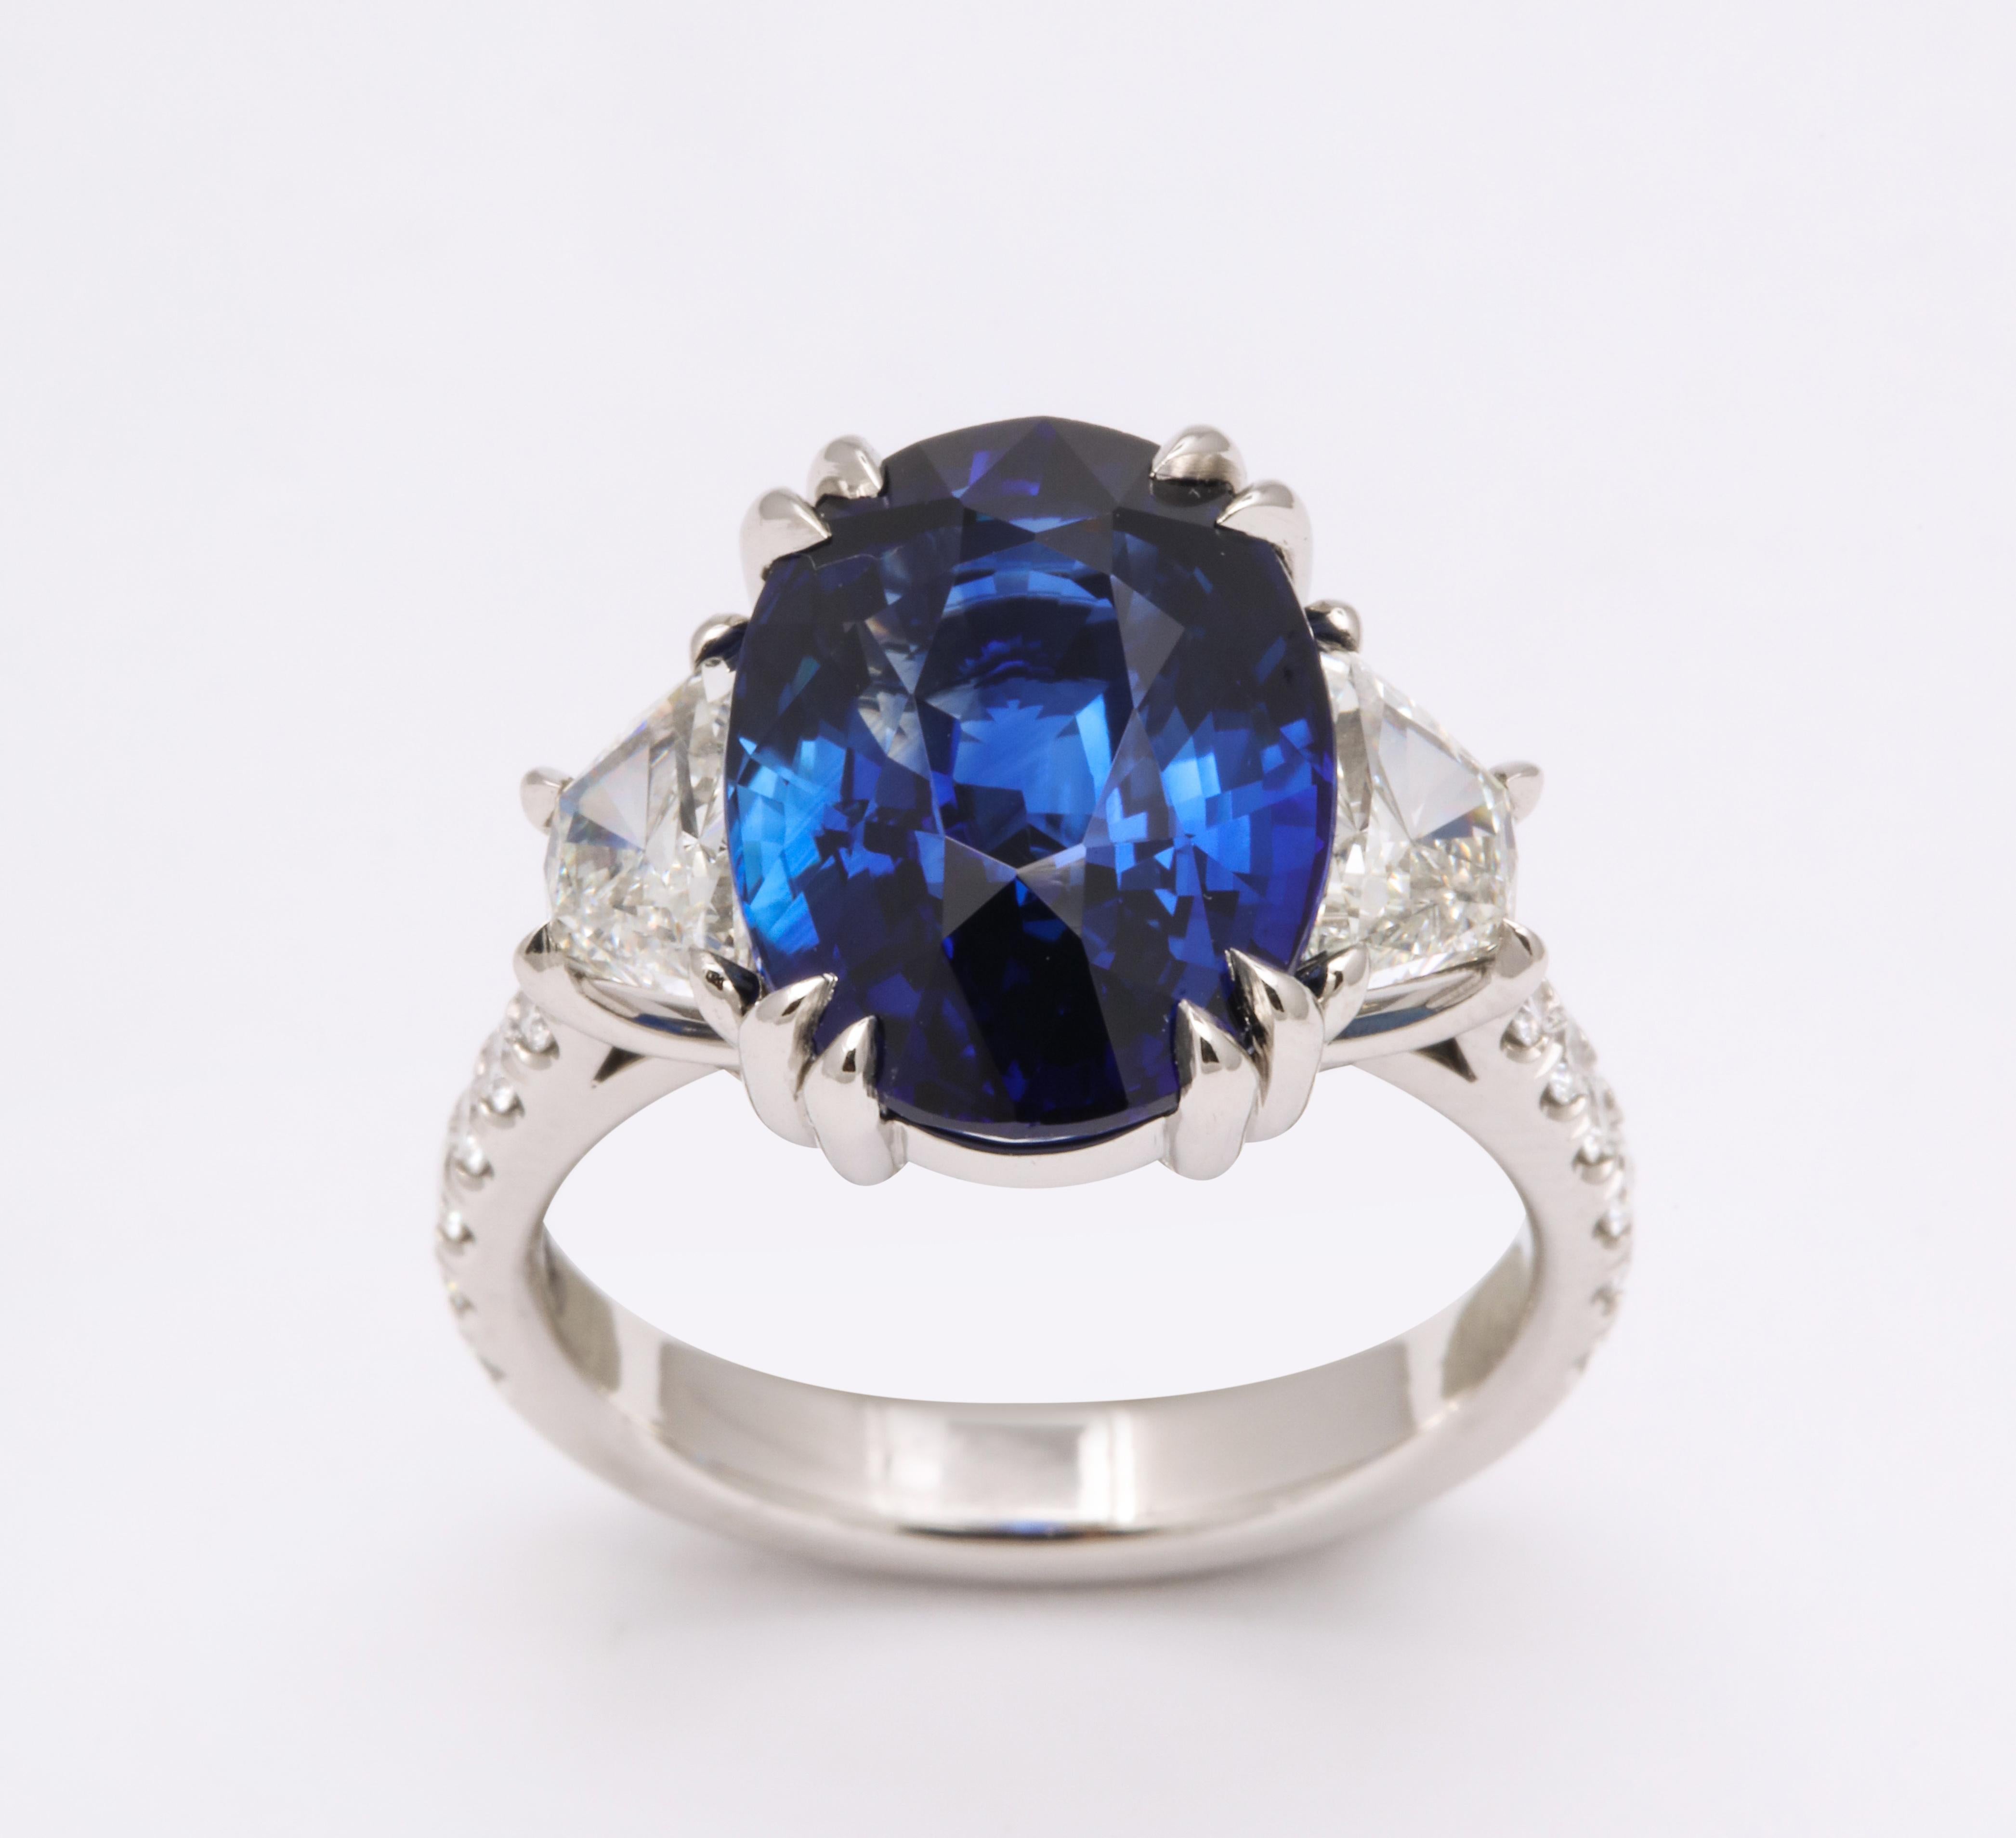 
8.62 carat Vivid Blue Ceylon Sapphire!!

A fabulous and vibrant blue sapphire set in a fabulous custom diamond ring. 

The ring features 1.45 carats of white side and round brilliant cut diamonds set in platinum. 

The sapphire is certified by